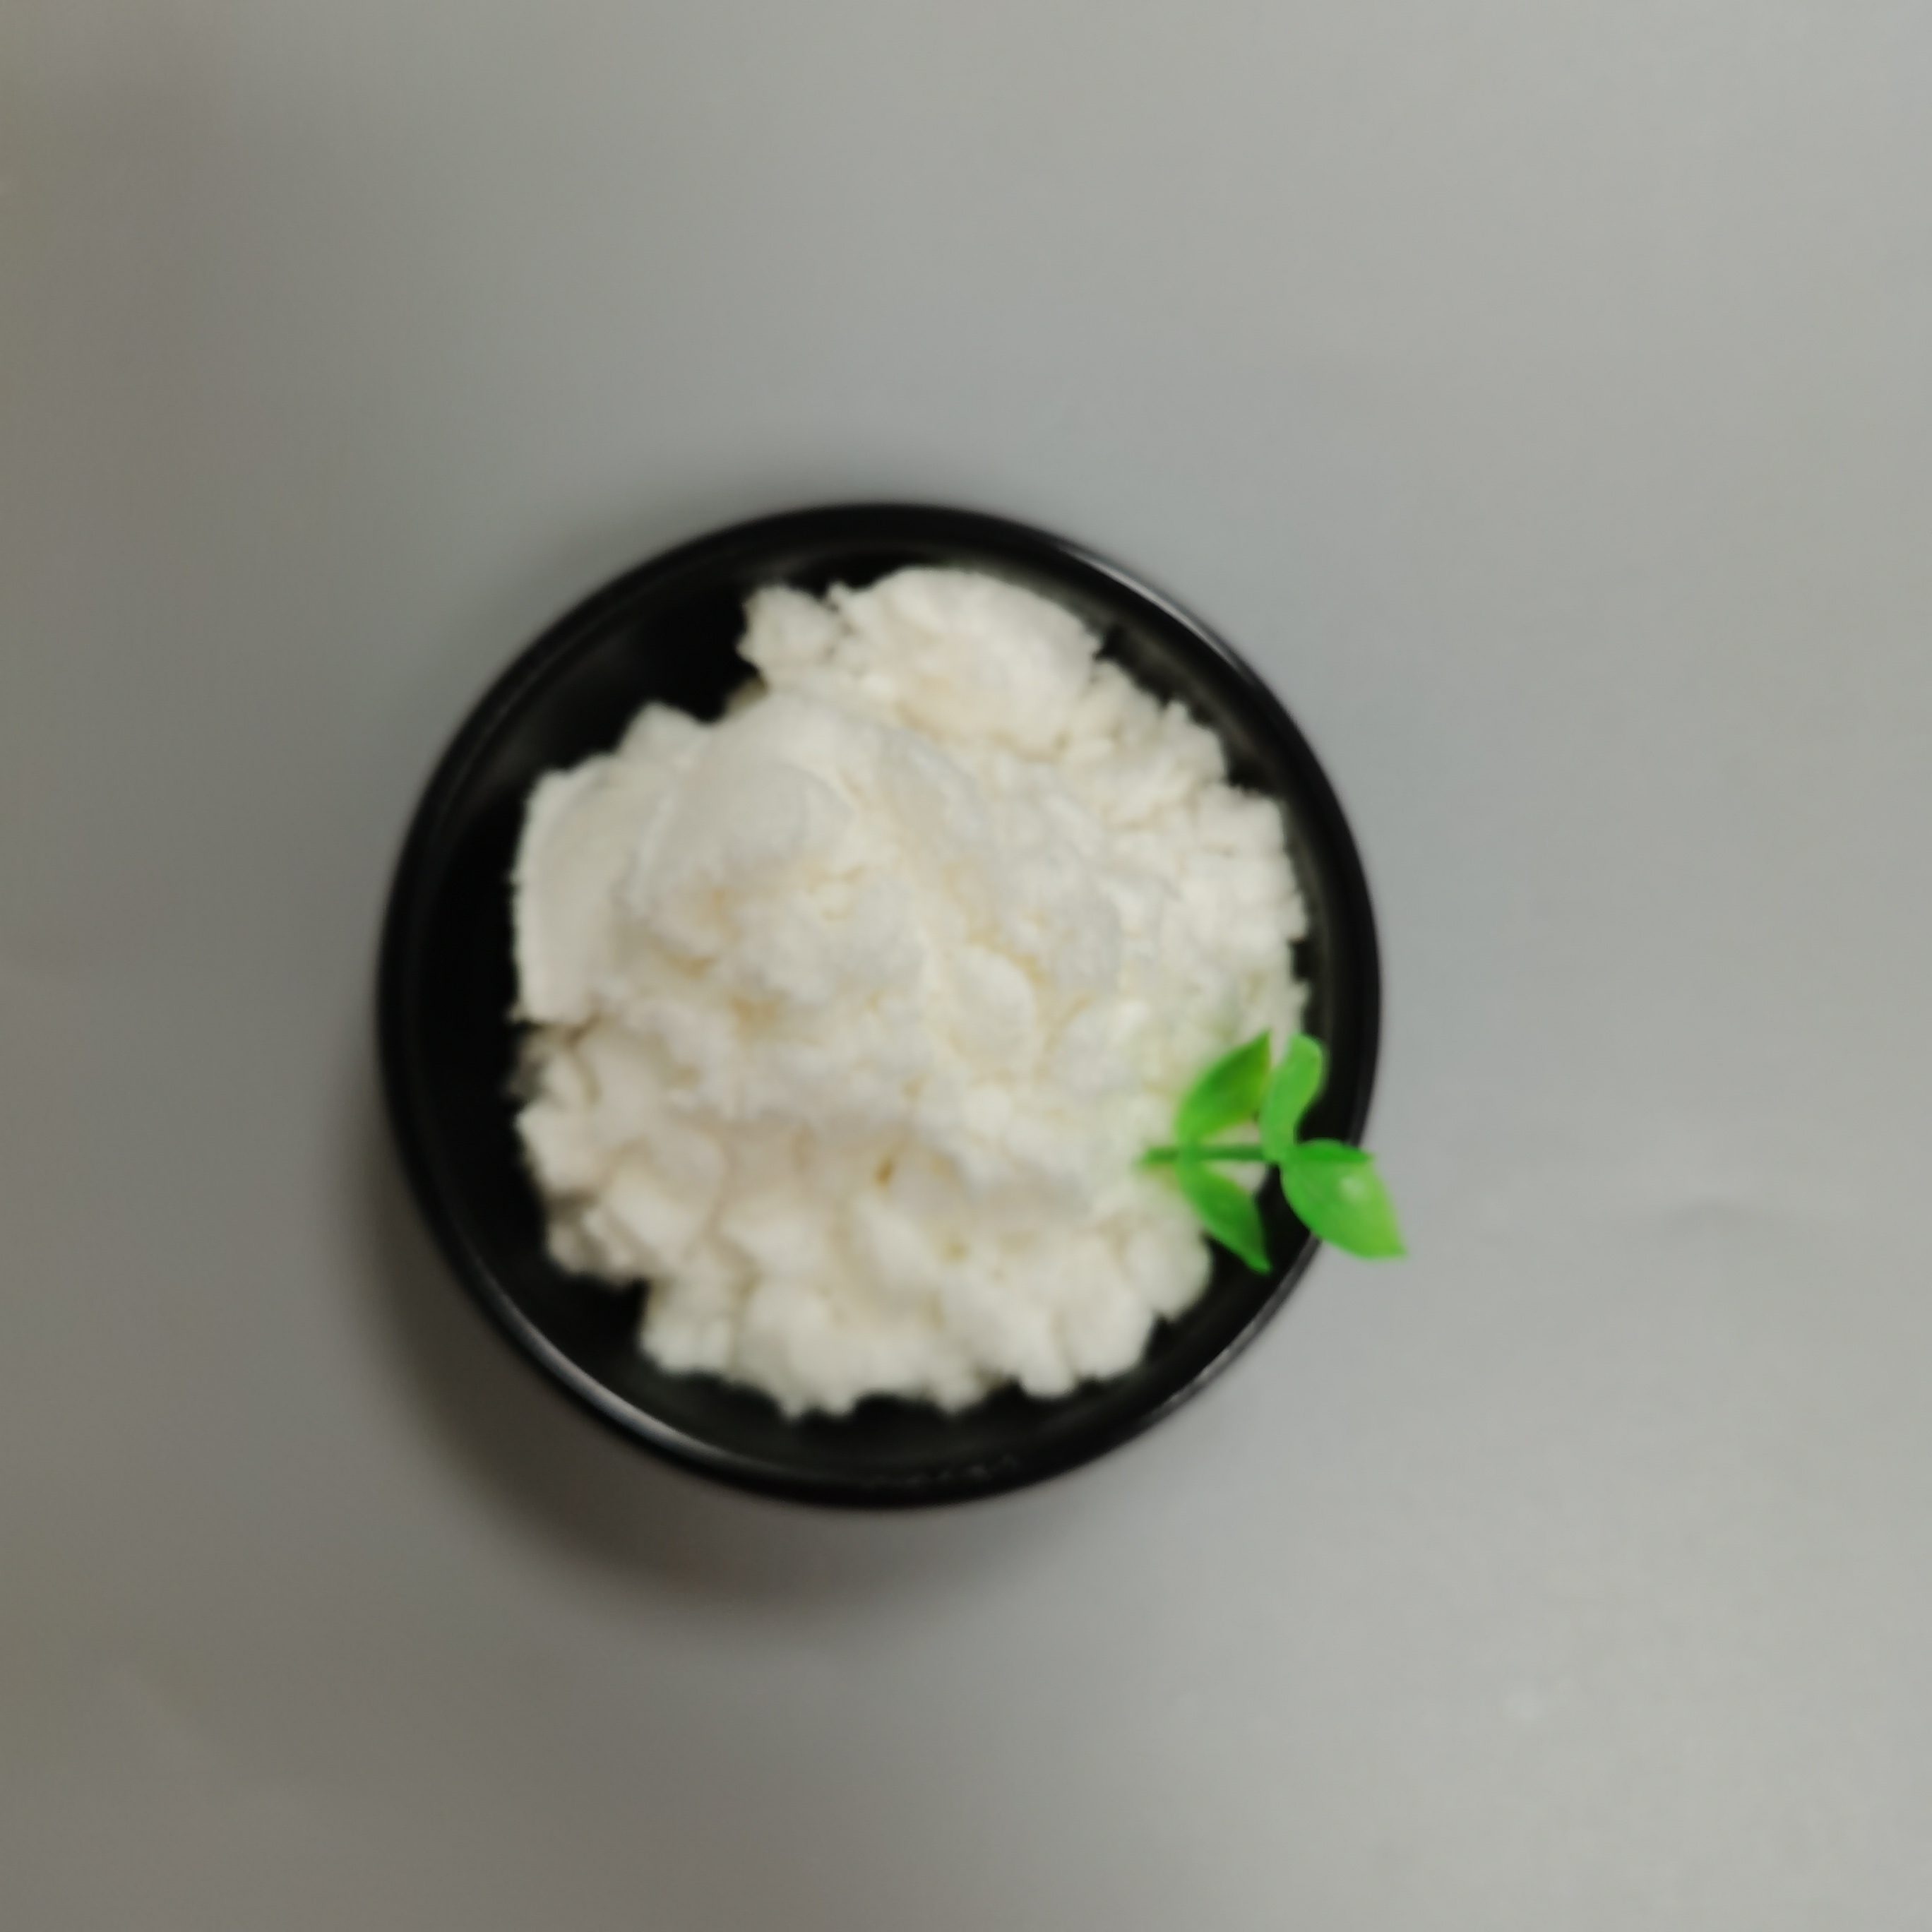 White High Quality BMK Glycidate For Research Chemical